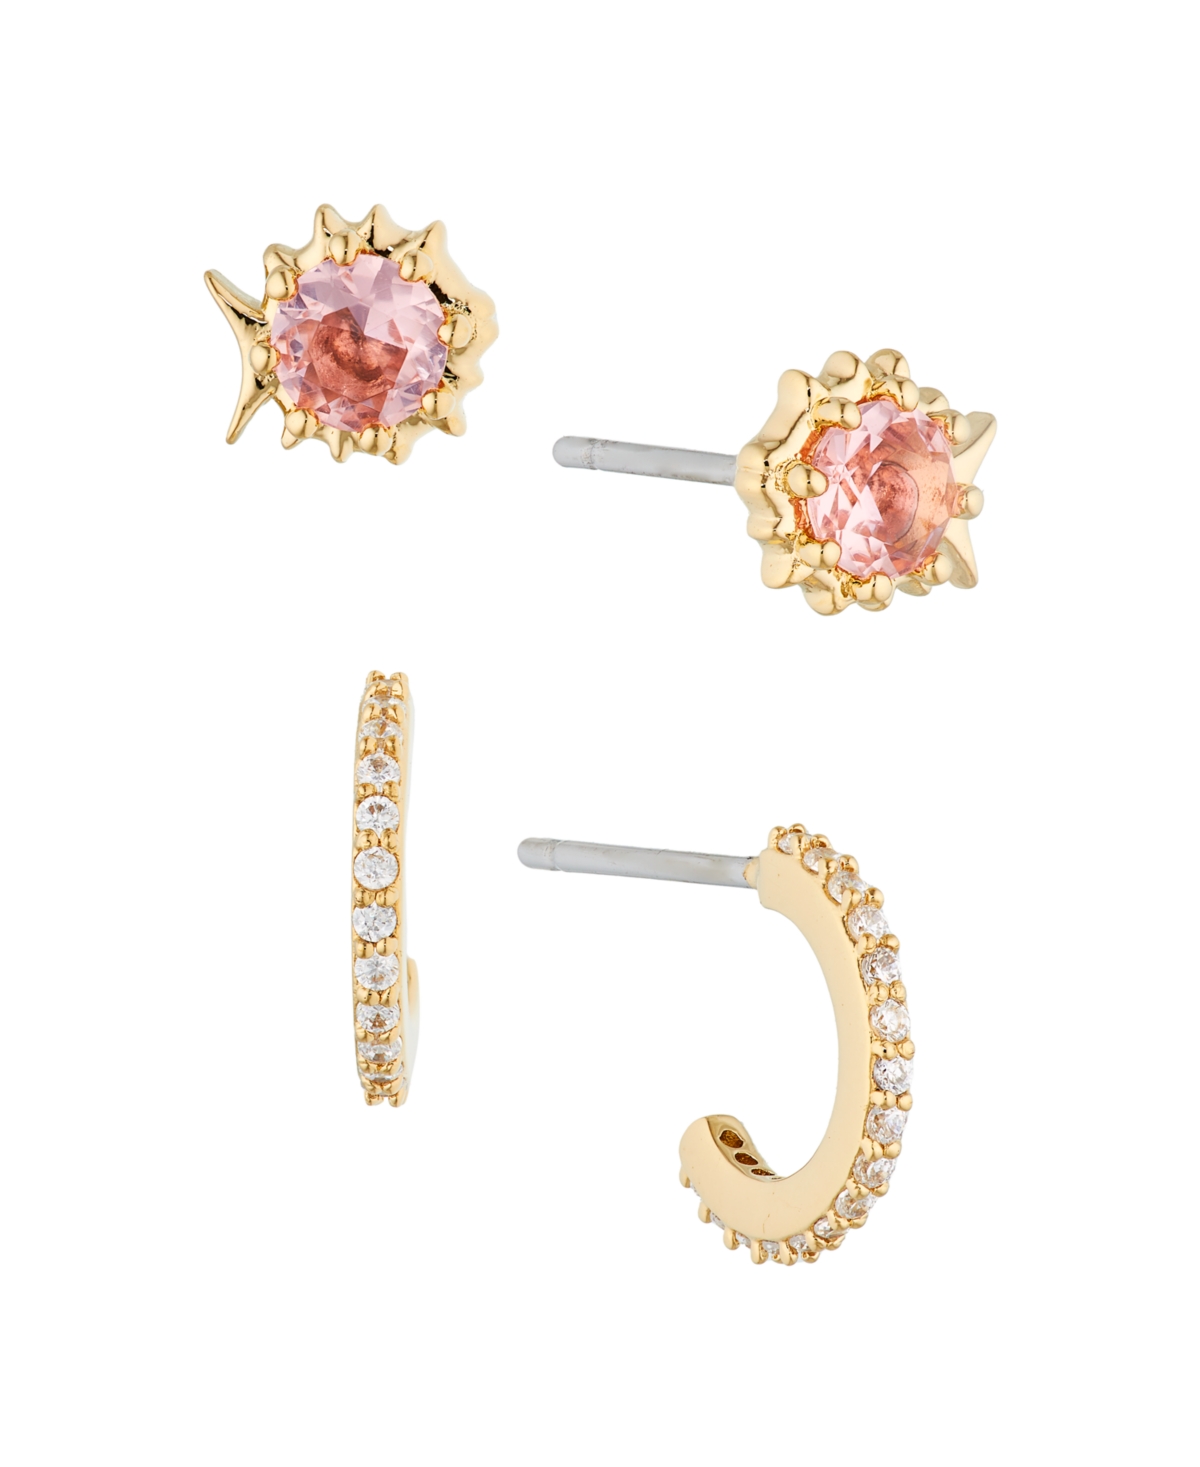 Ava Nadri Gold Cubic Zirconia Extra Small Pave Hoop And Puffer Fish Stud Earrings Set Of Two Pair